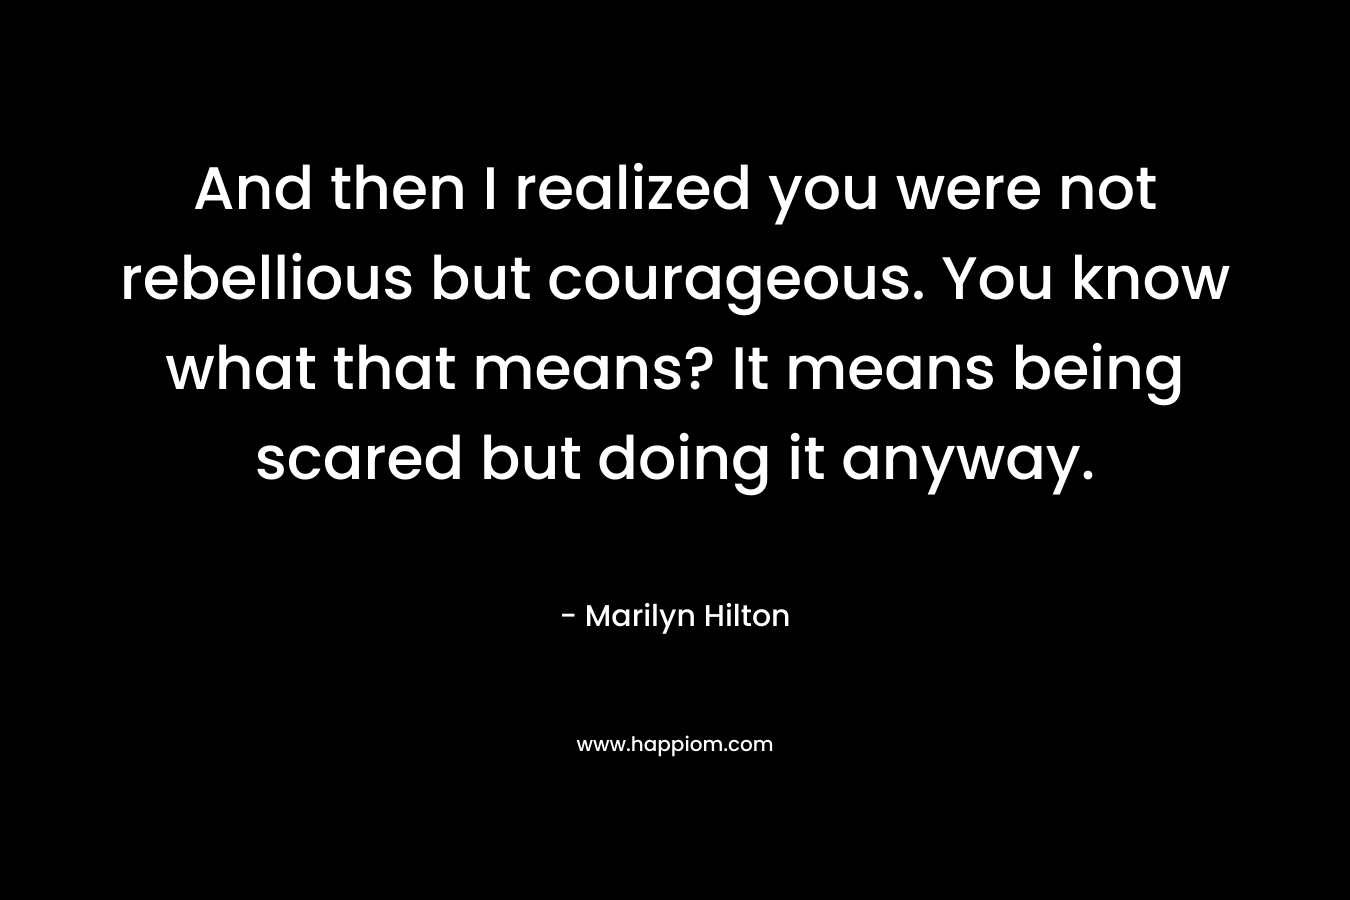 And then I realized you were not rebellious but courageous. You know what that means? It means being scared but doing it anyway. – Marilyn Hilton